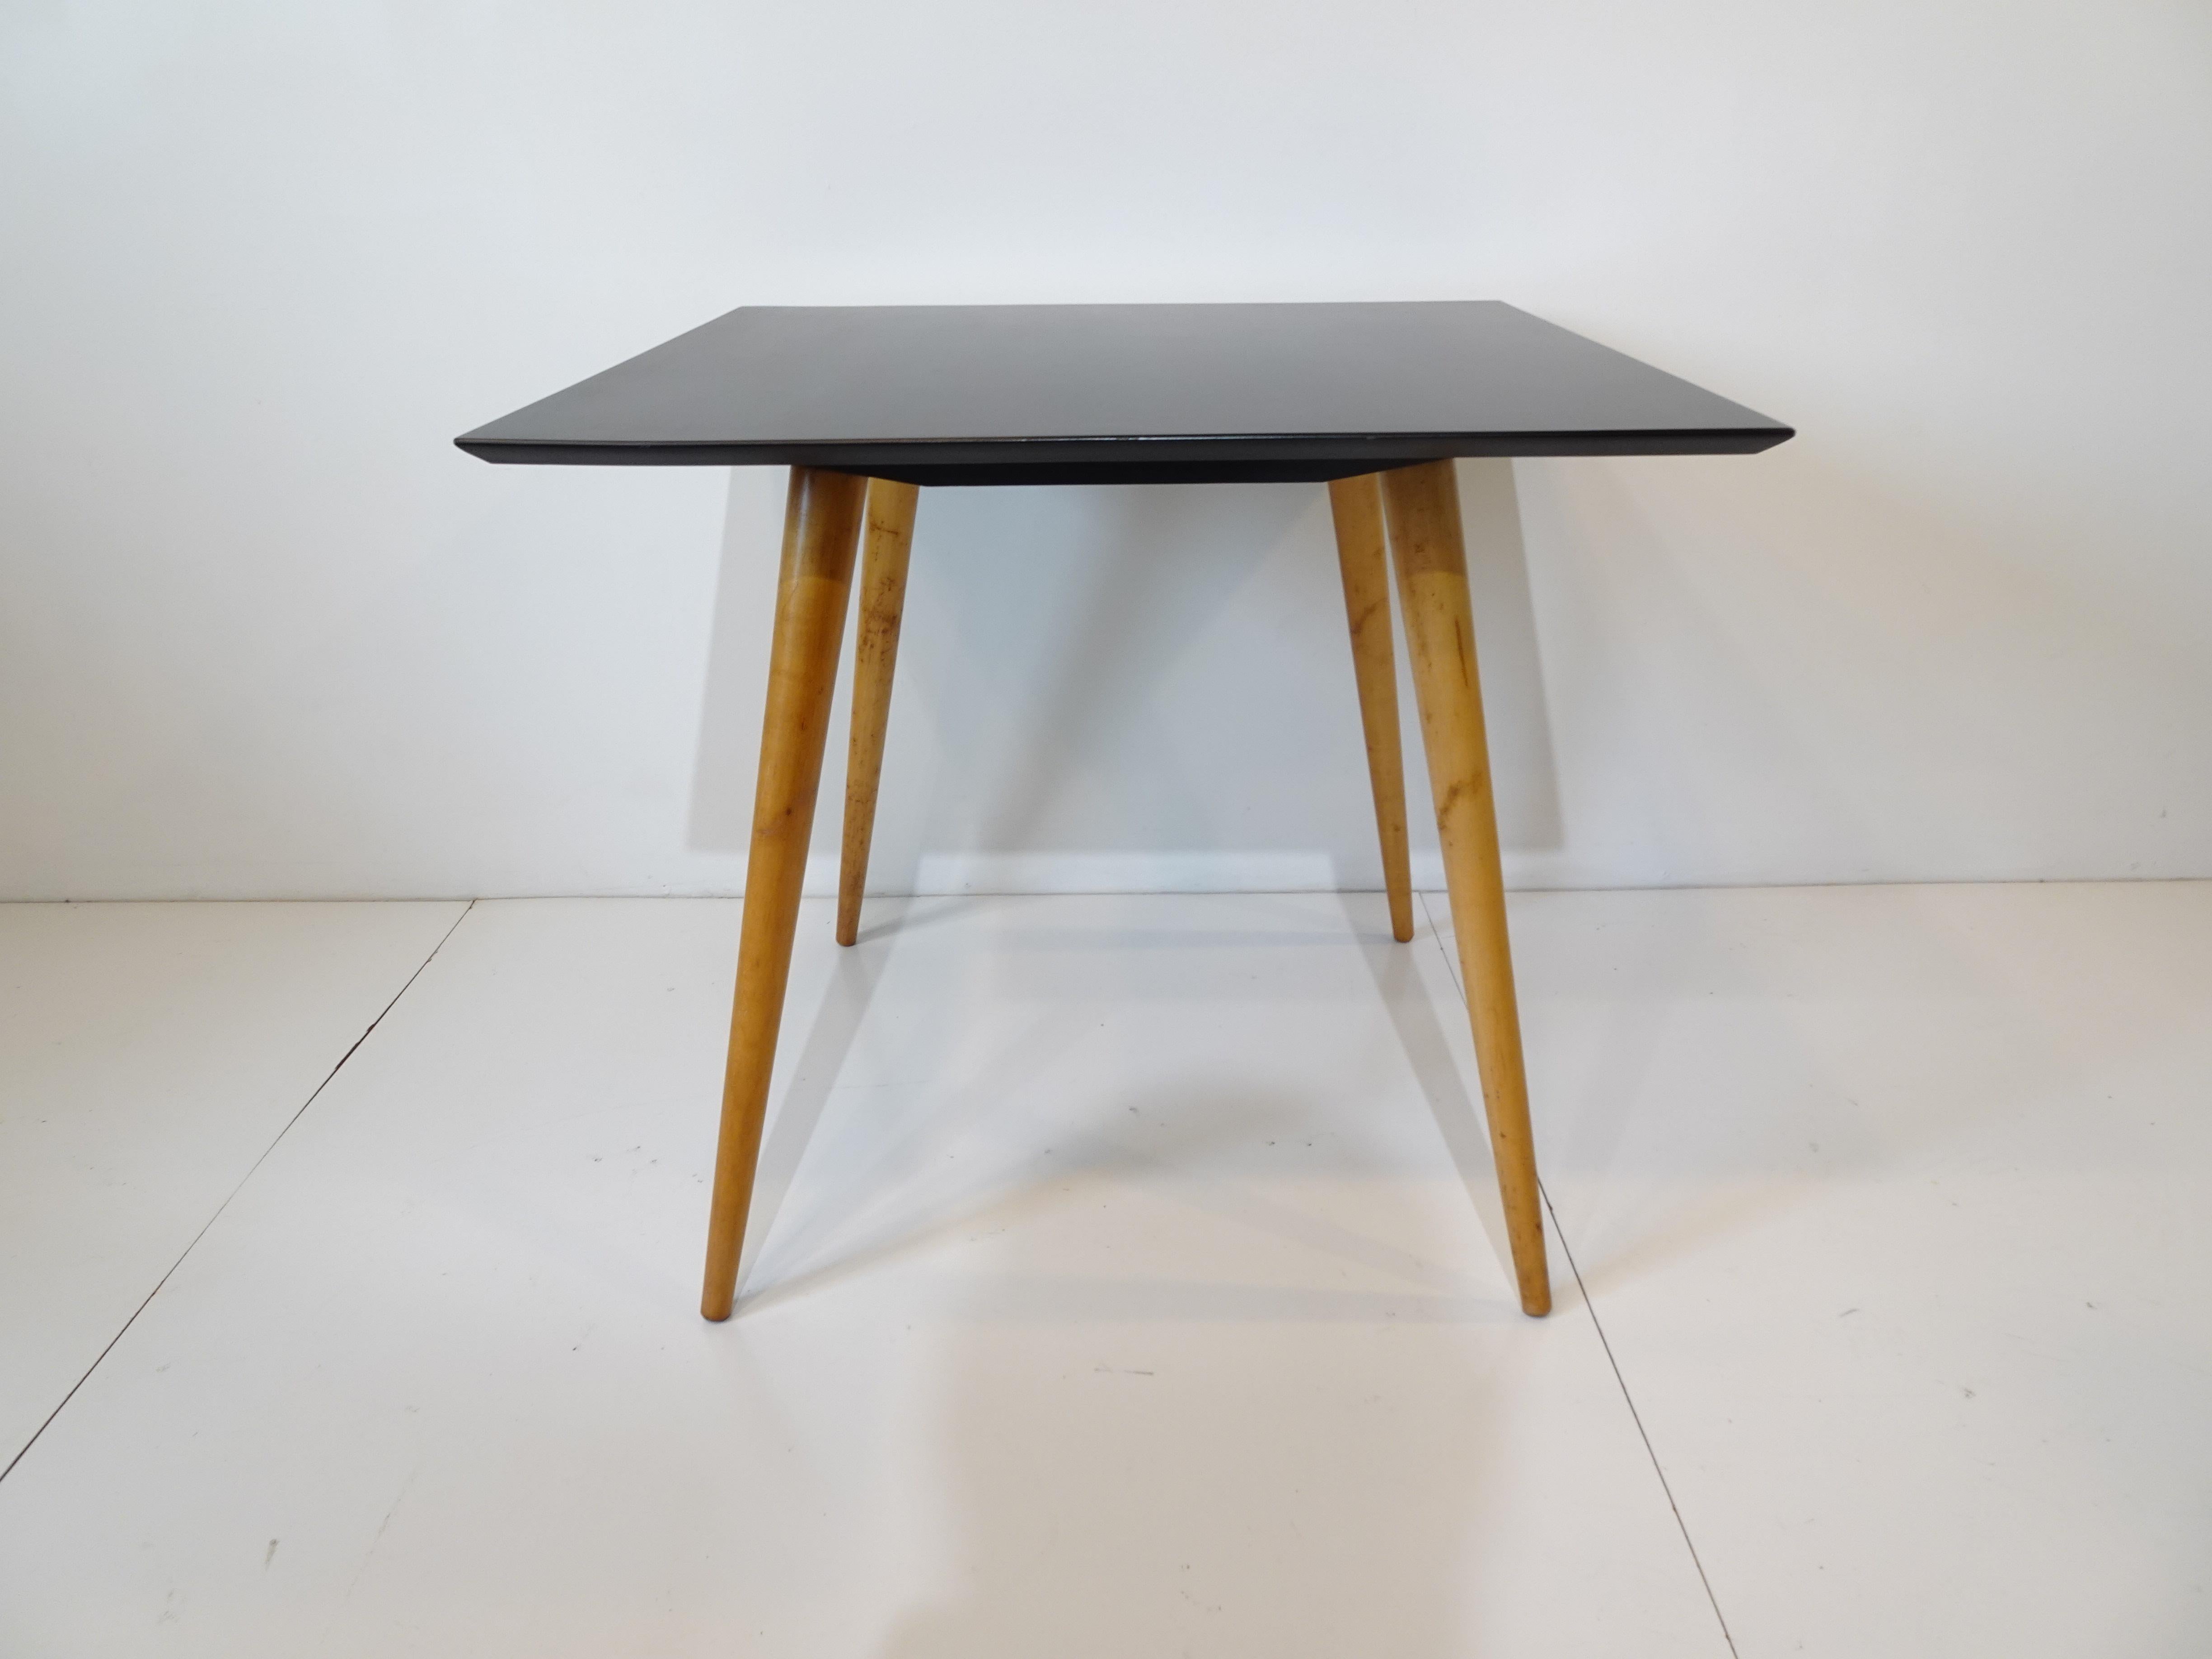 A satin black topped small dining or game table with maple legs giving the piece a floating feature designed by Paul McCobb and manufactured by the Winchendon Furniture company for their Planner Group Collection.